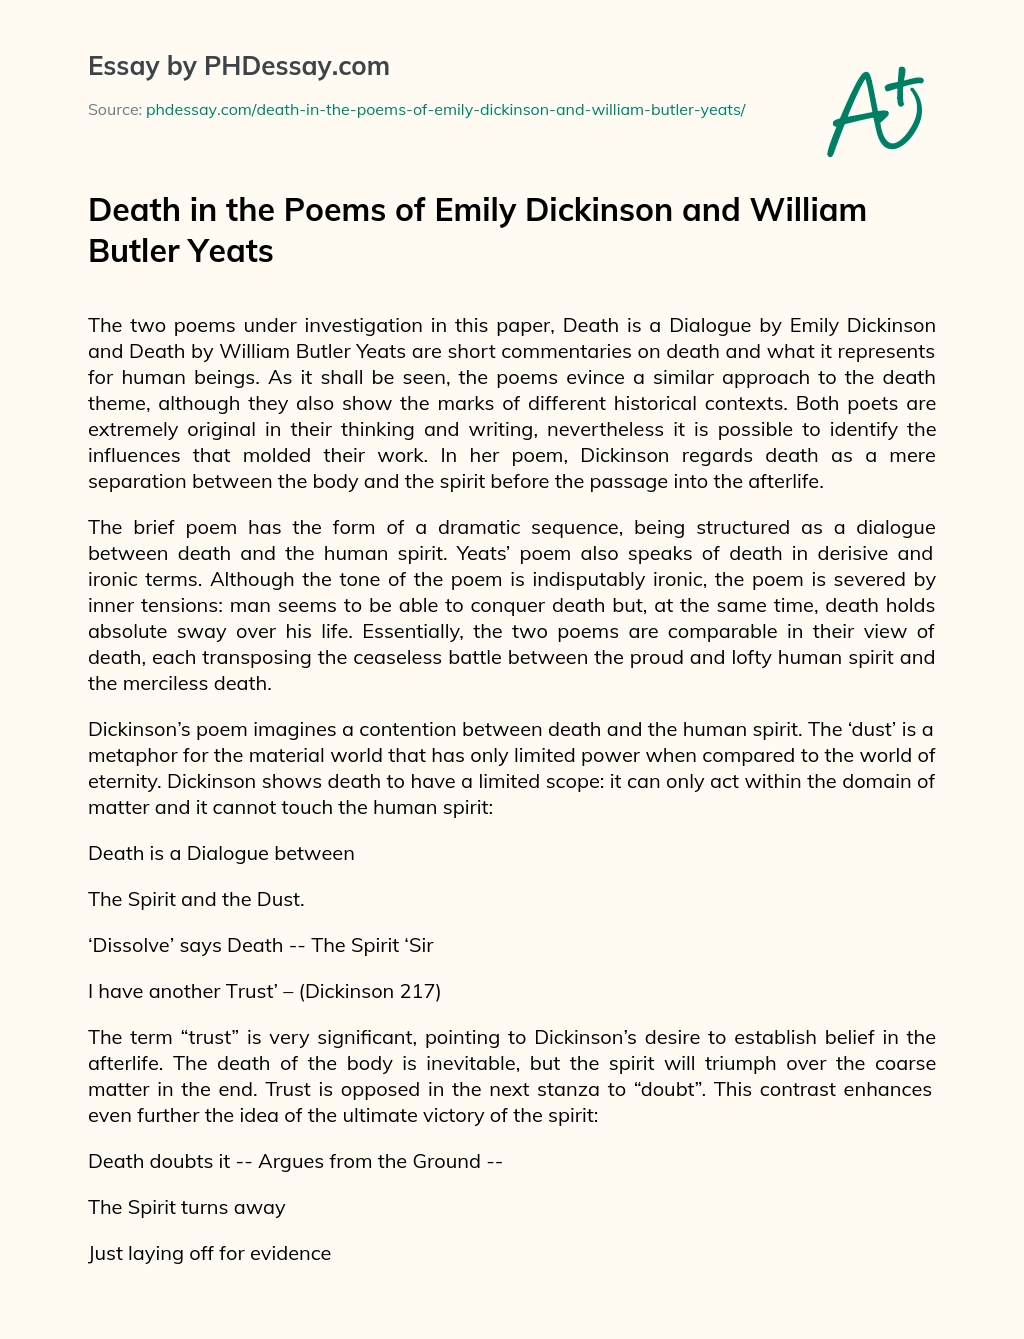 Death in the Poems of Emily Dickinson and William Butler Yeats essay